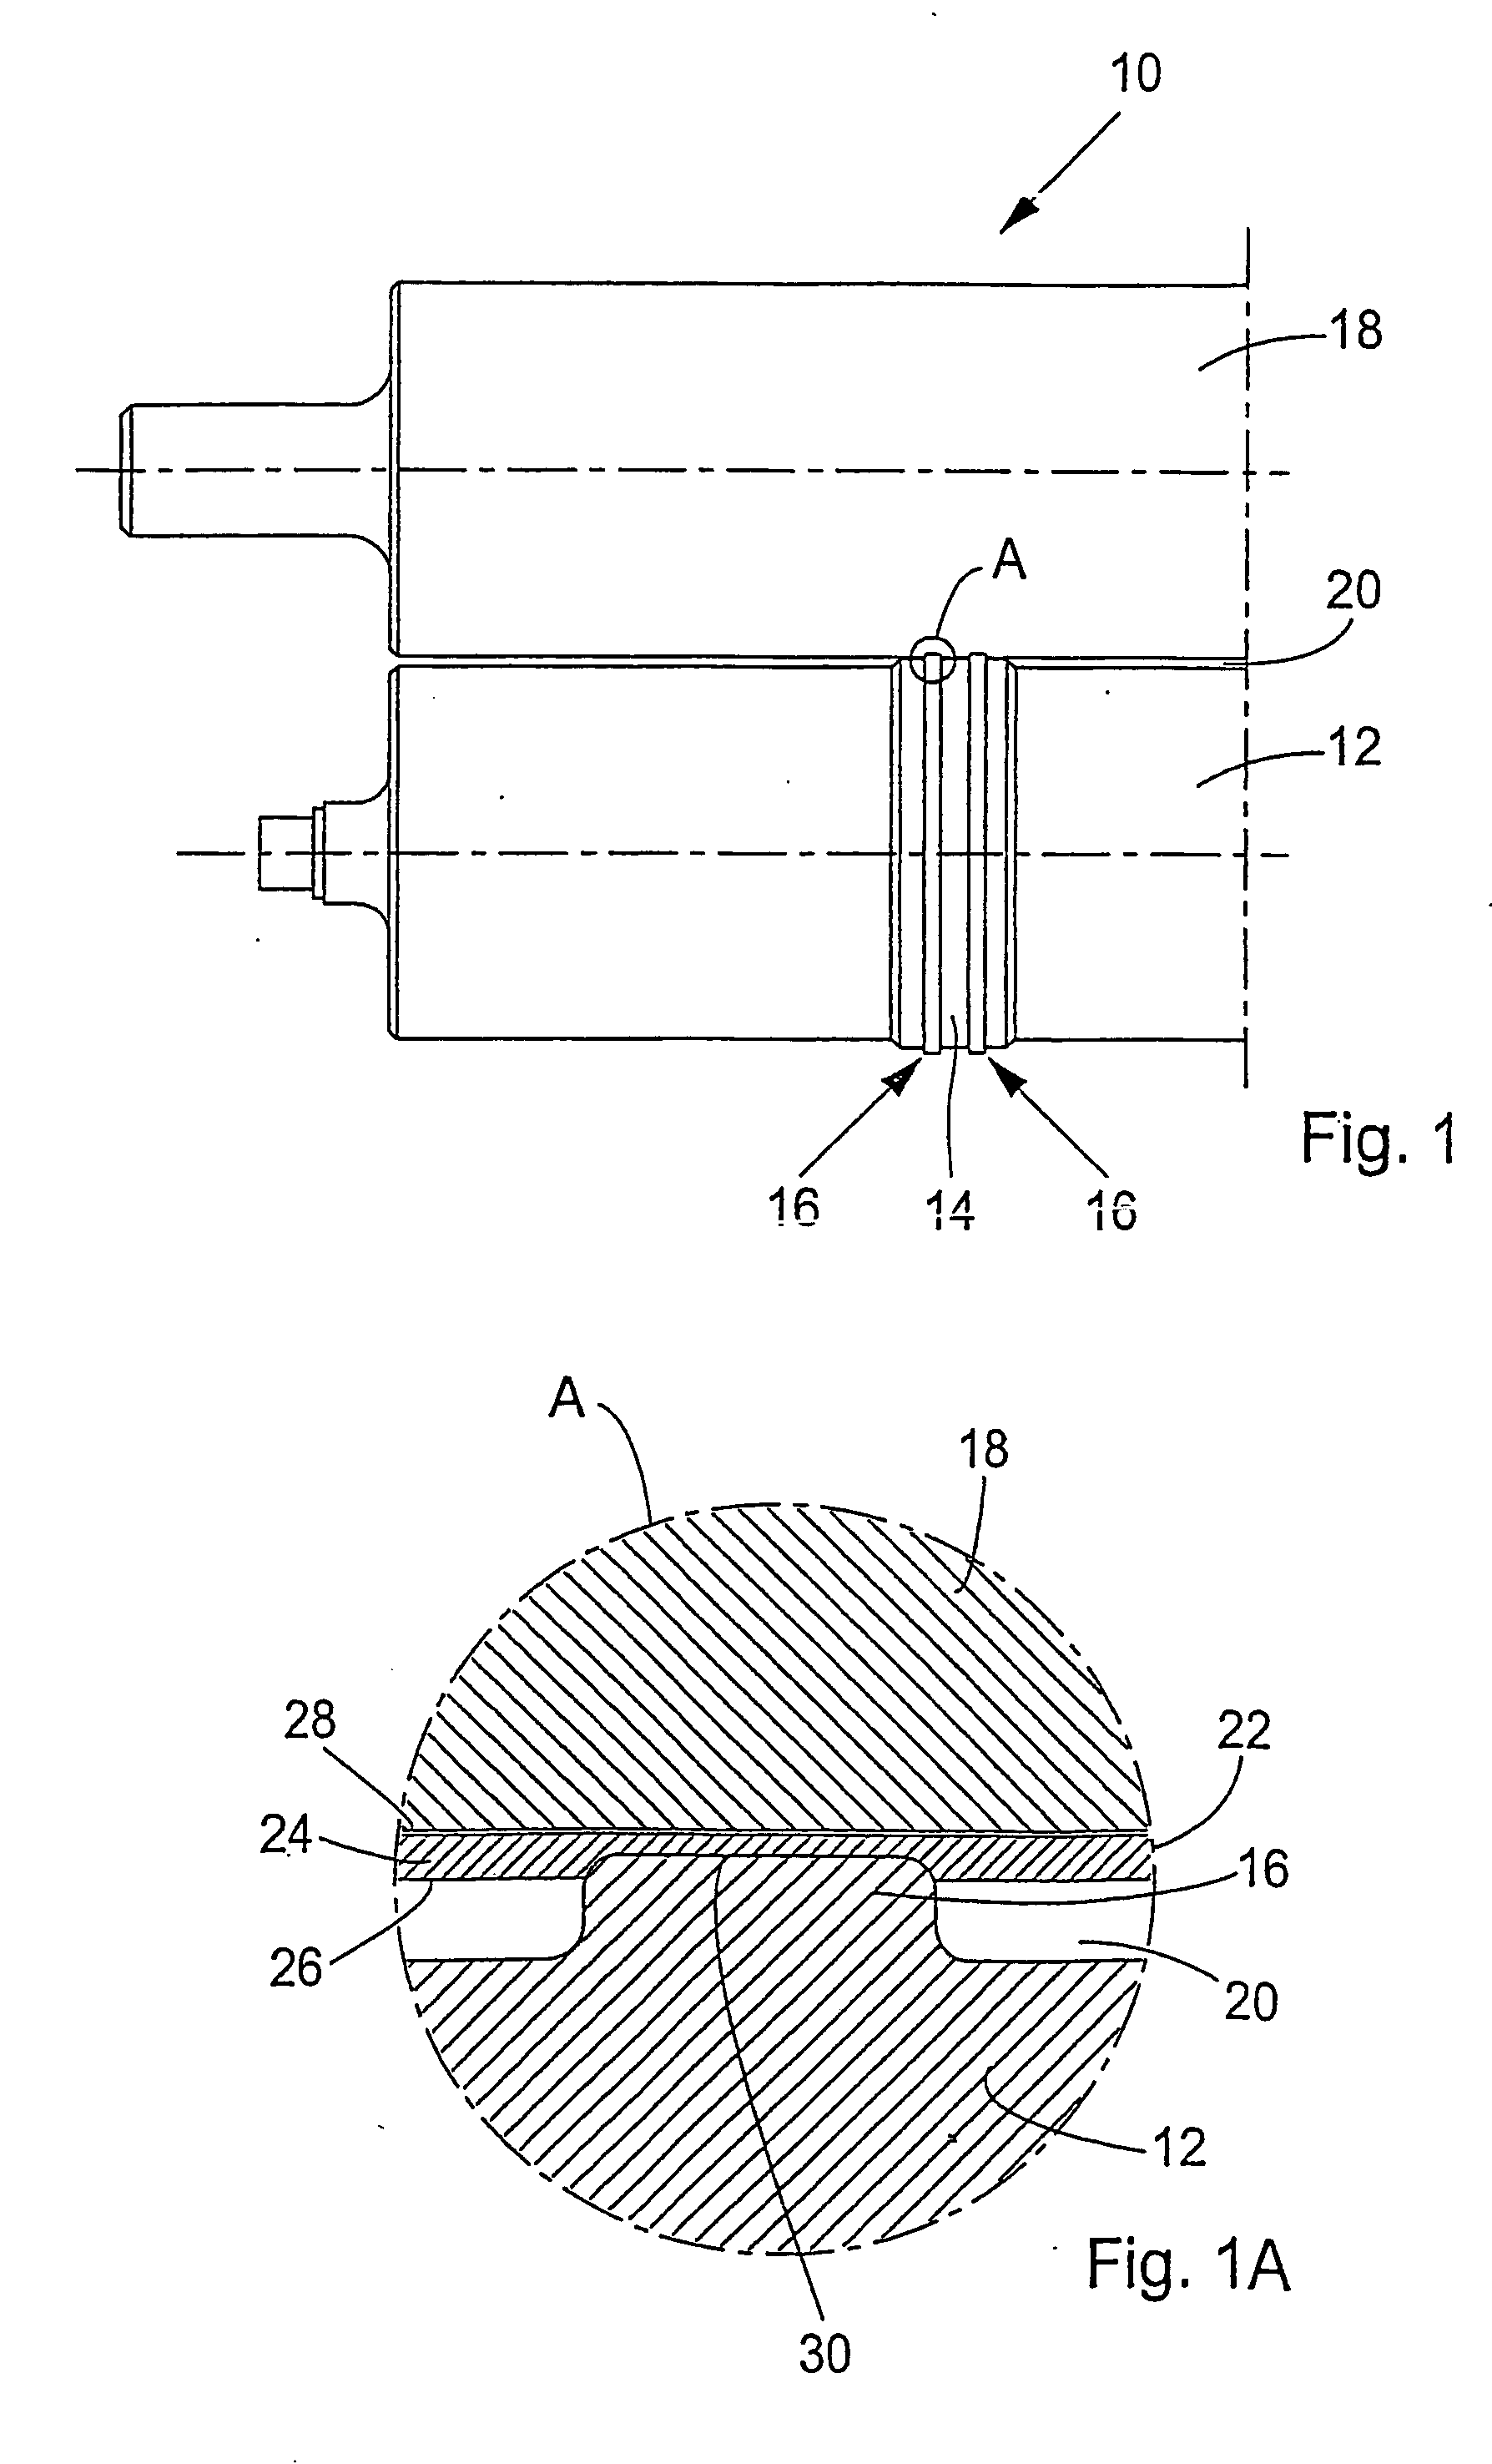 Method in the manufacture of a packaging laminate, a plant in the manufacture of the packaging laminate, and the thus manufactured packaging laminate